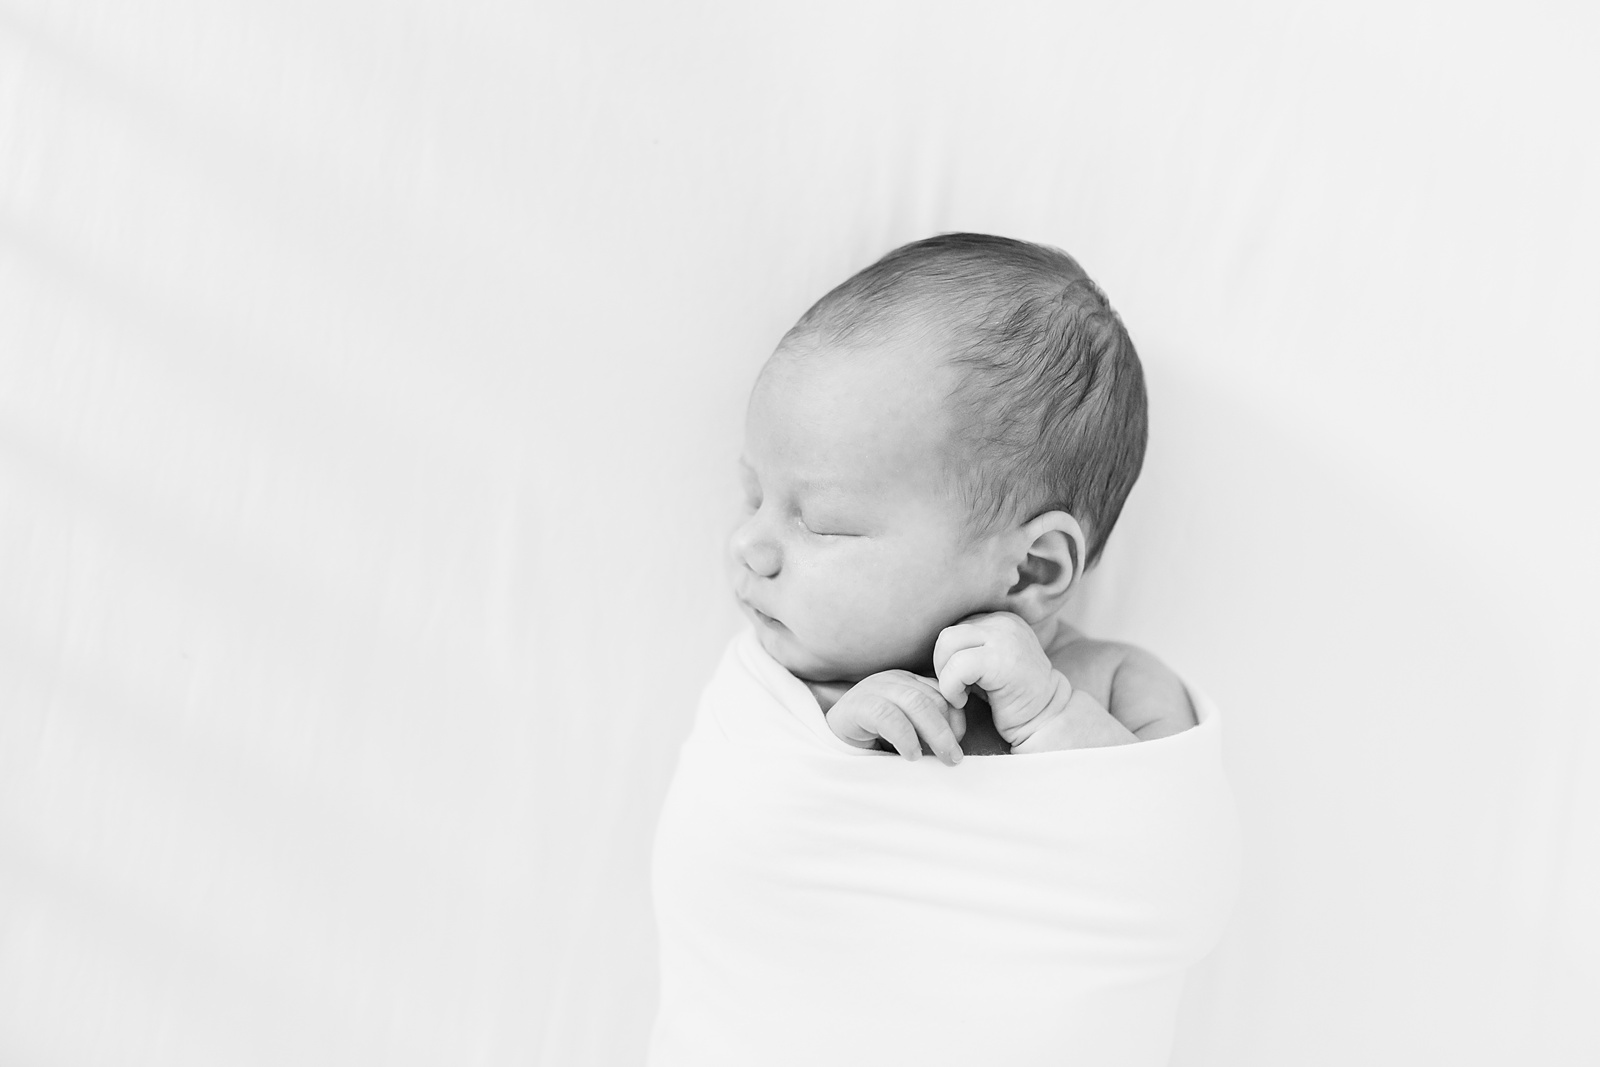 Baby in swaddle during lifestyle newborn photography session by Caitlyn Motycka Photography